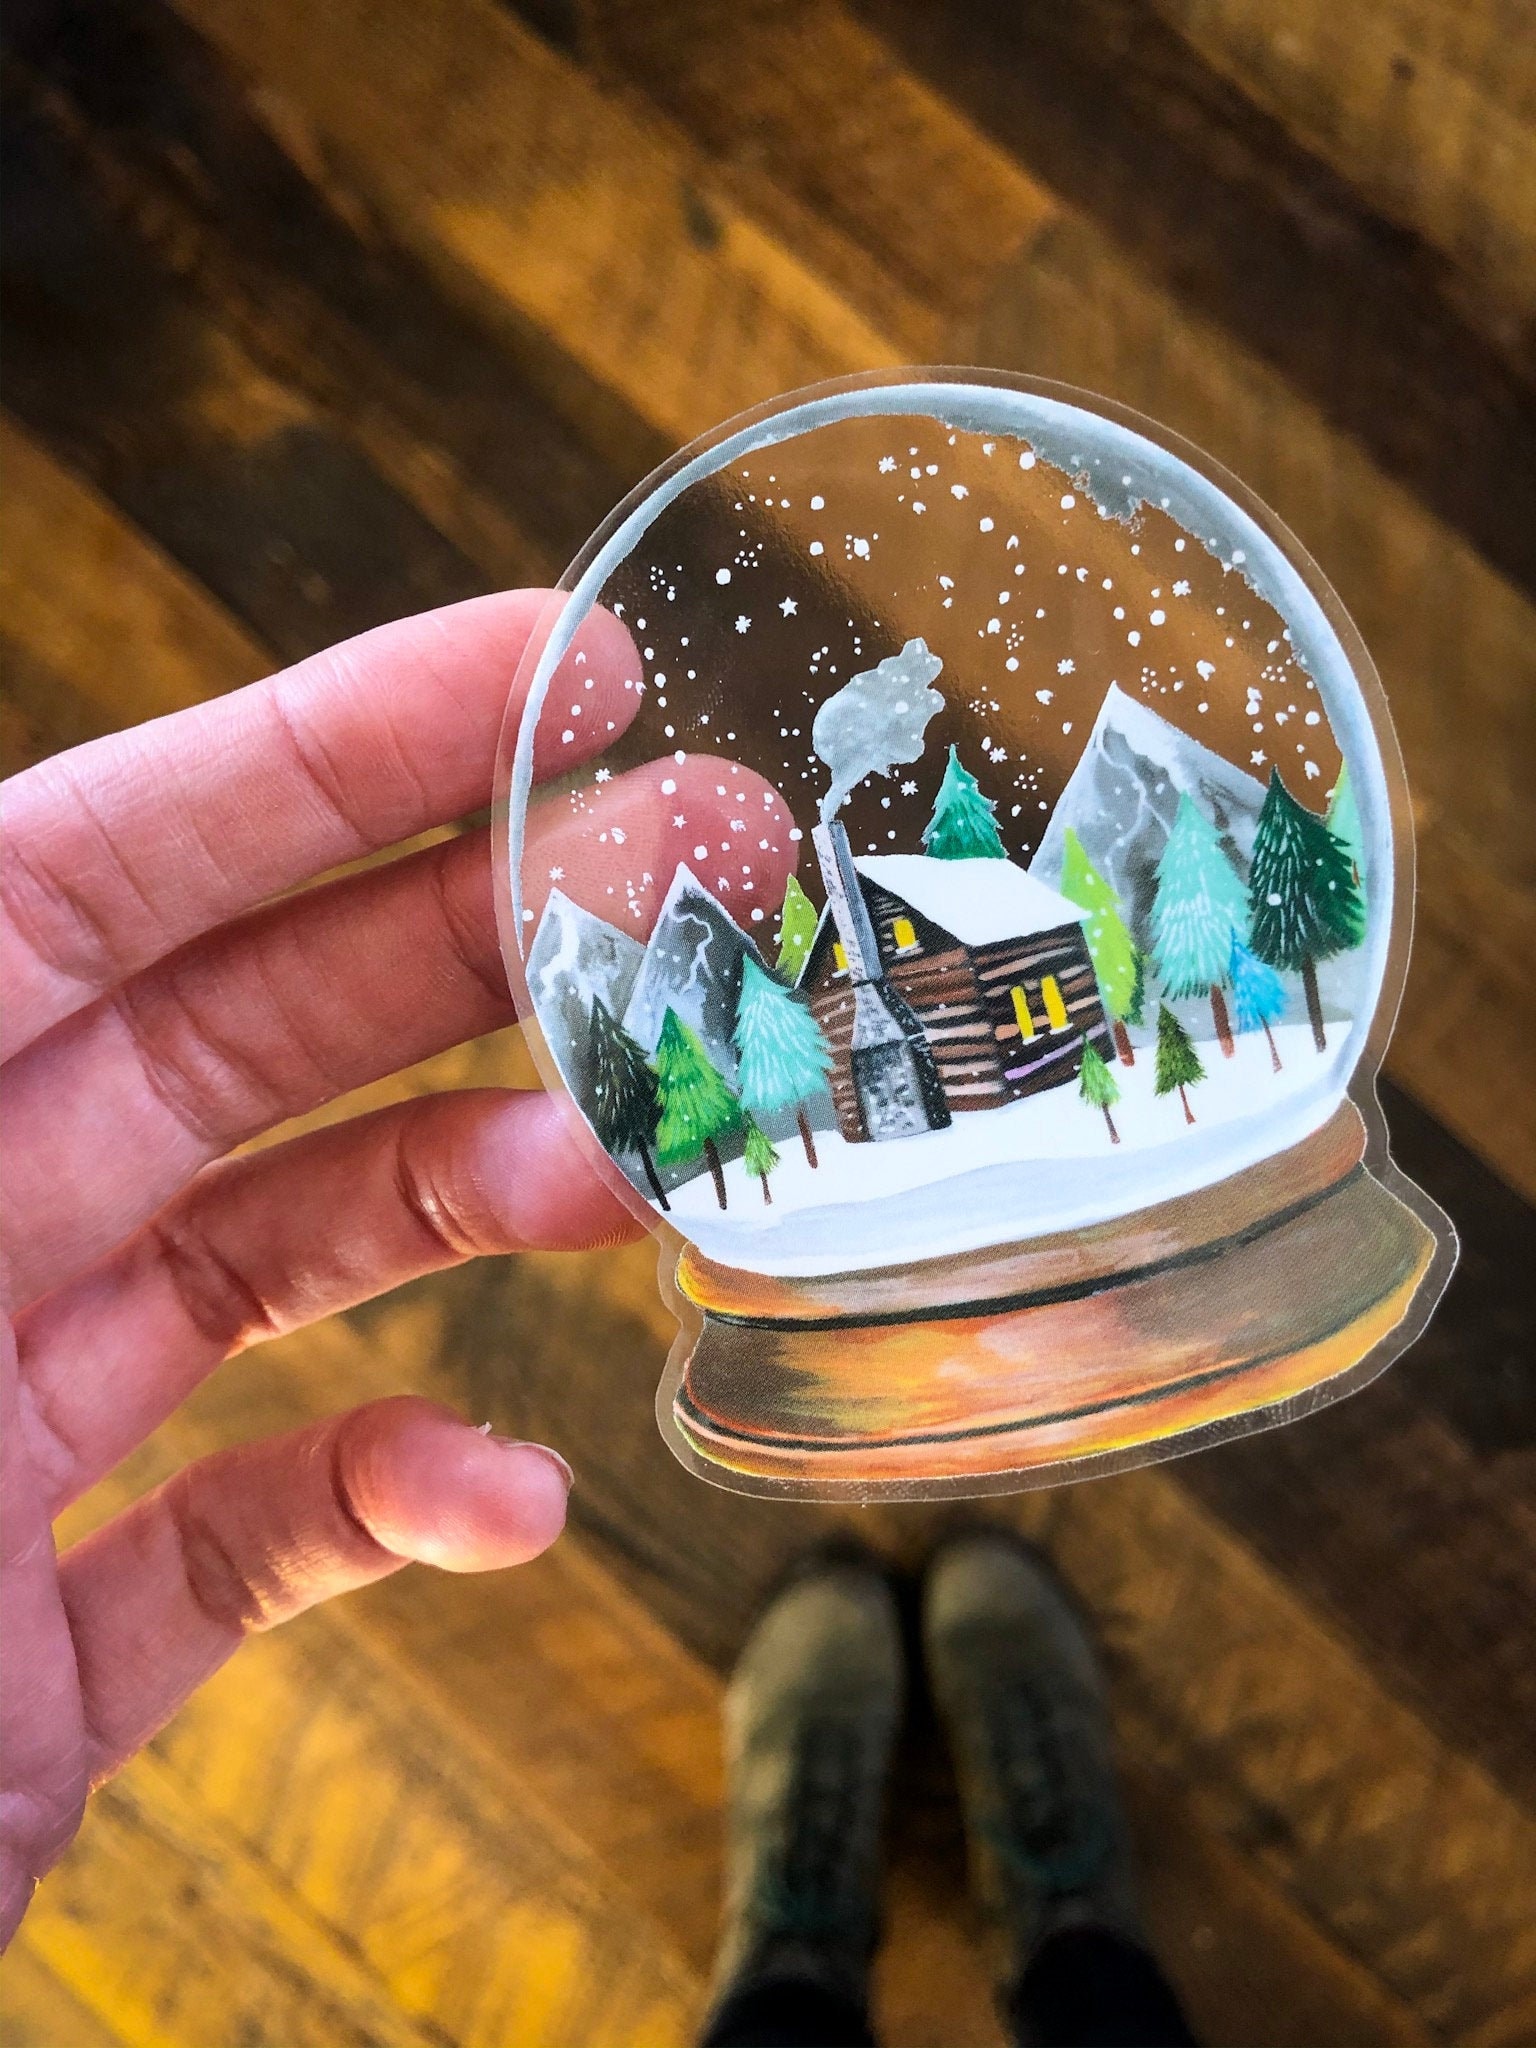 Snow Globe Craft Ideas for the Holiday - S&S Blog